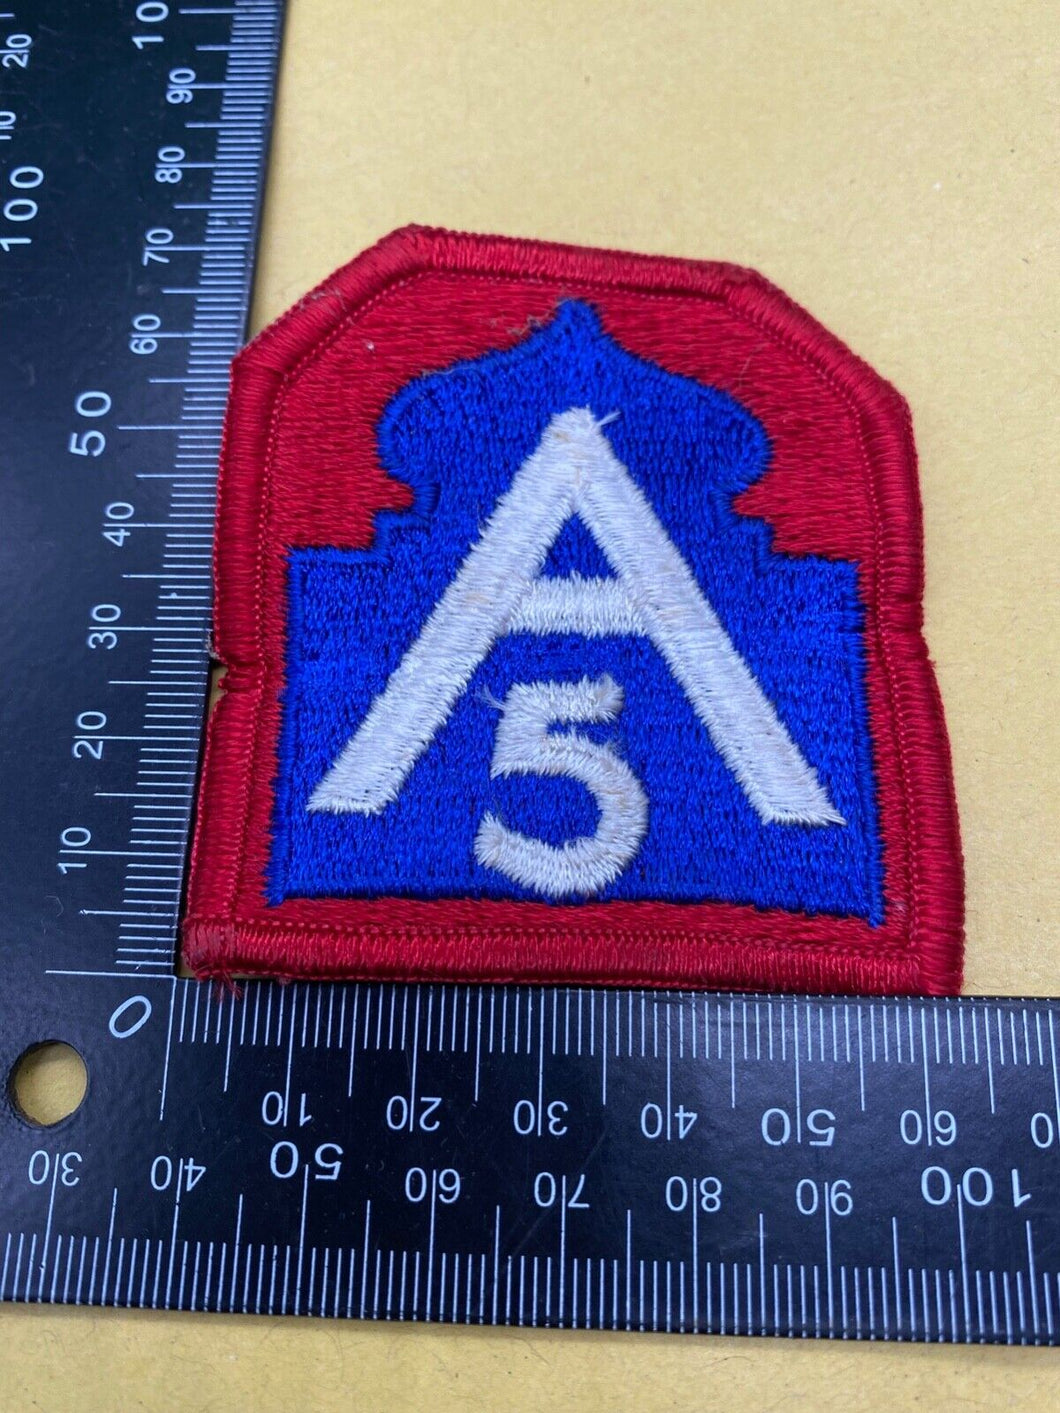 An original US 5th Army Patch/Badge. In Brand New Unissued Condition.